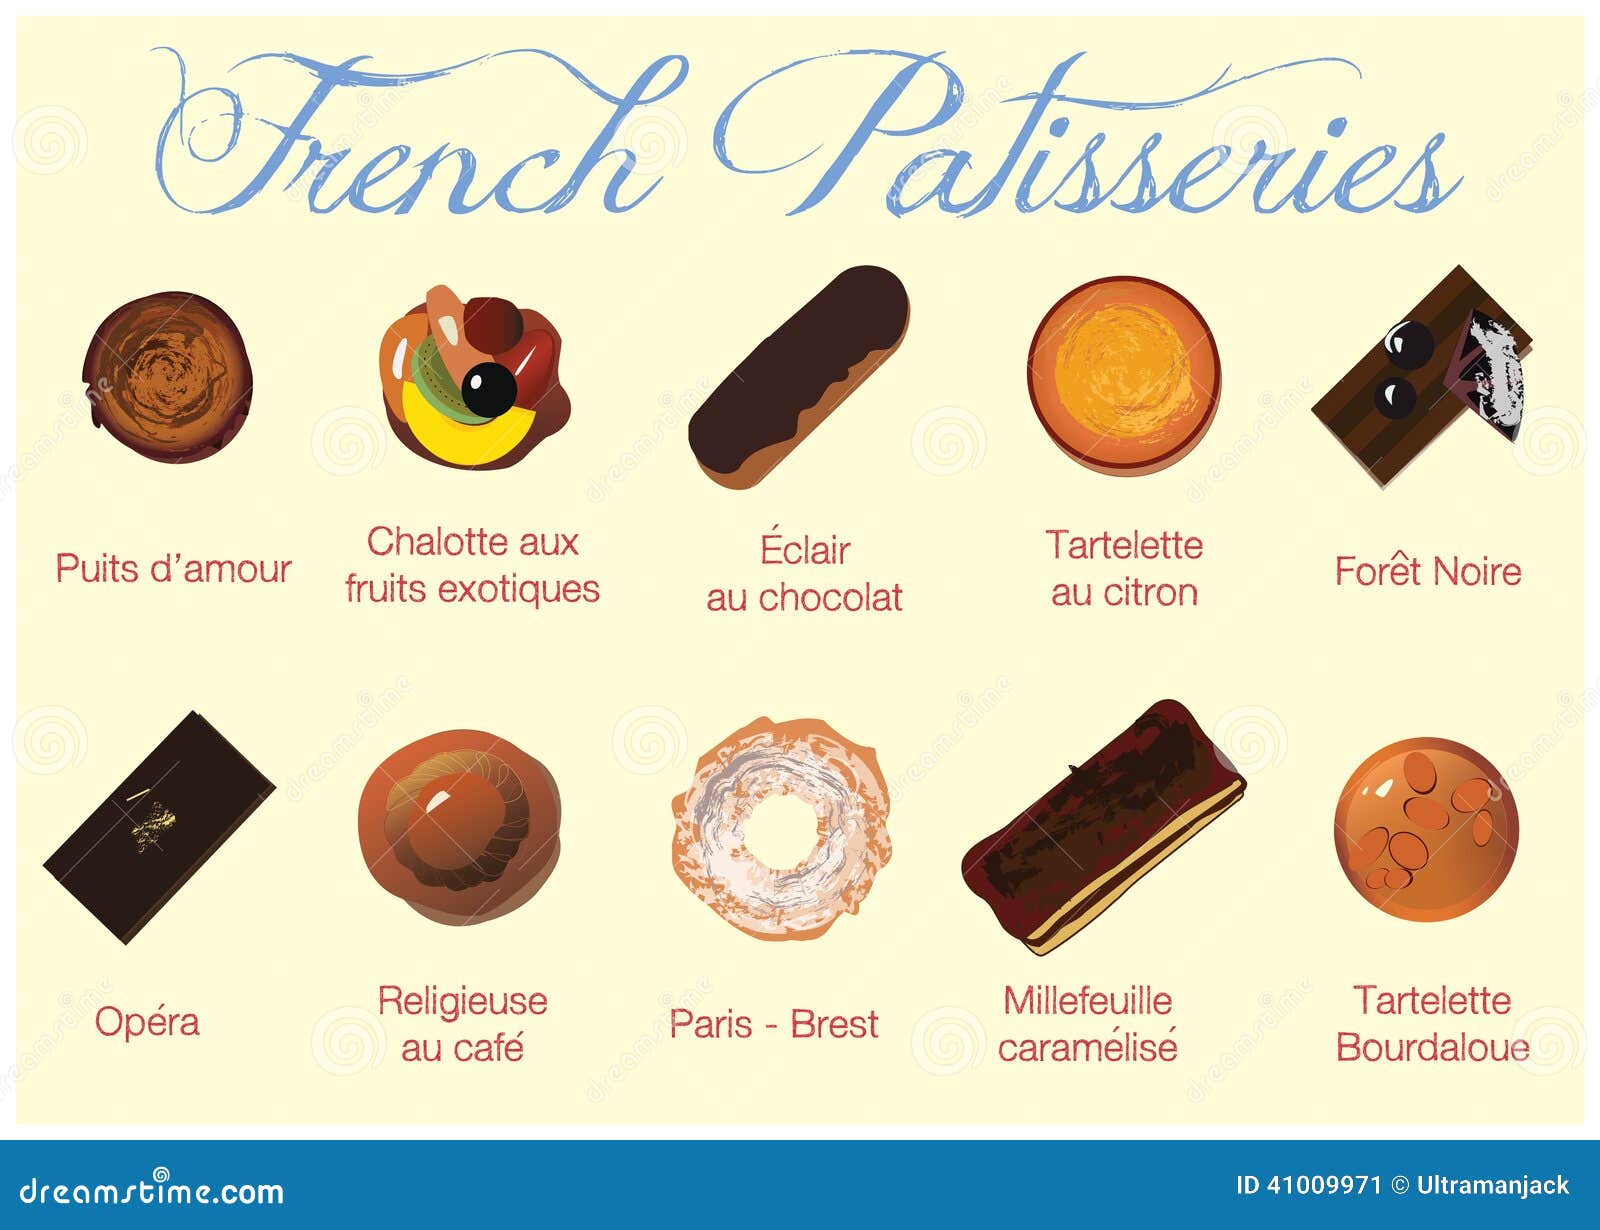 French Patisseries stock vector. Illustration of french - 41009971